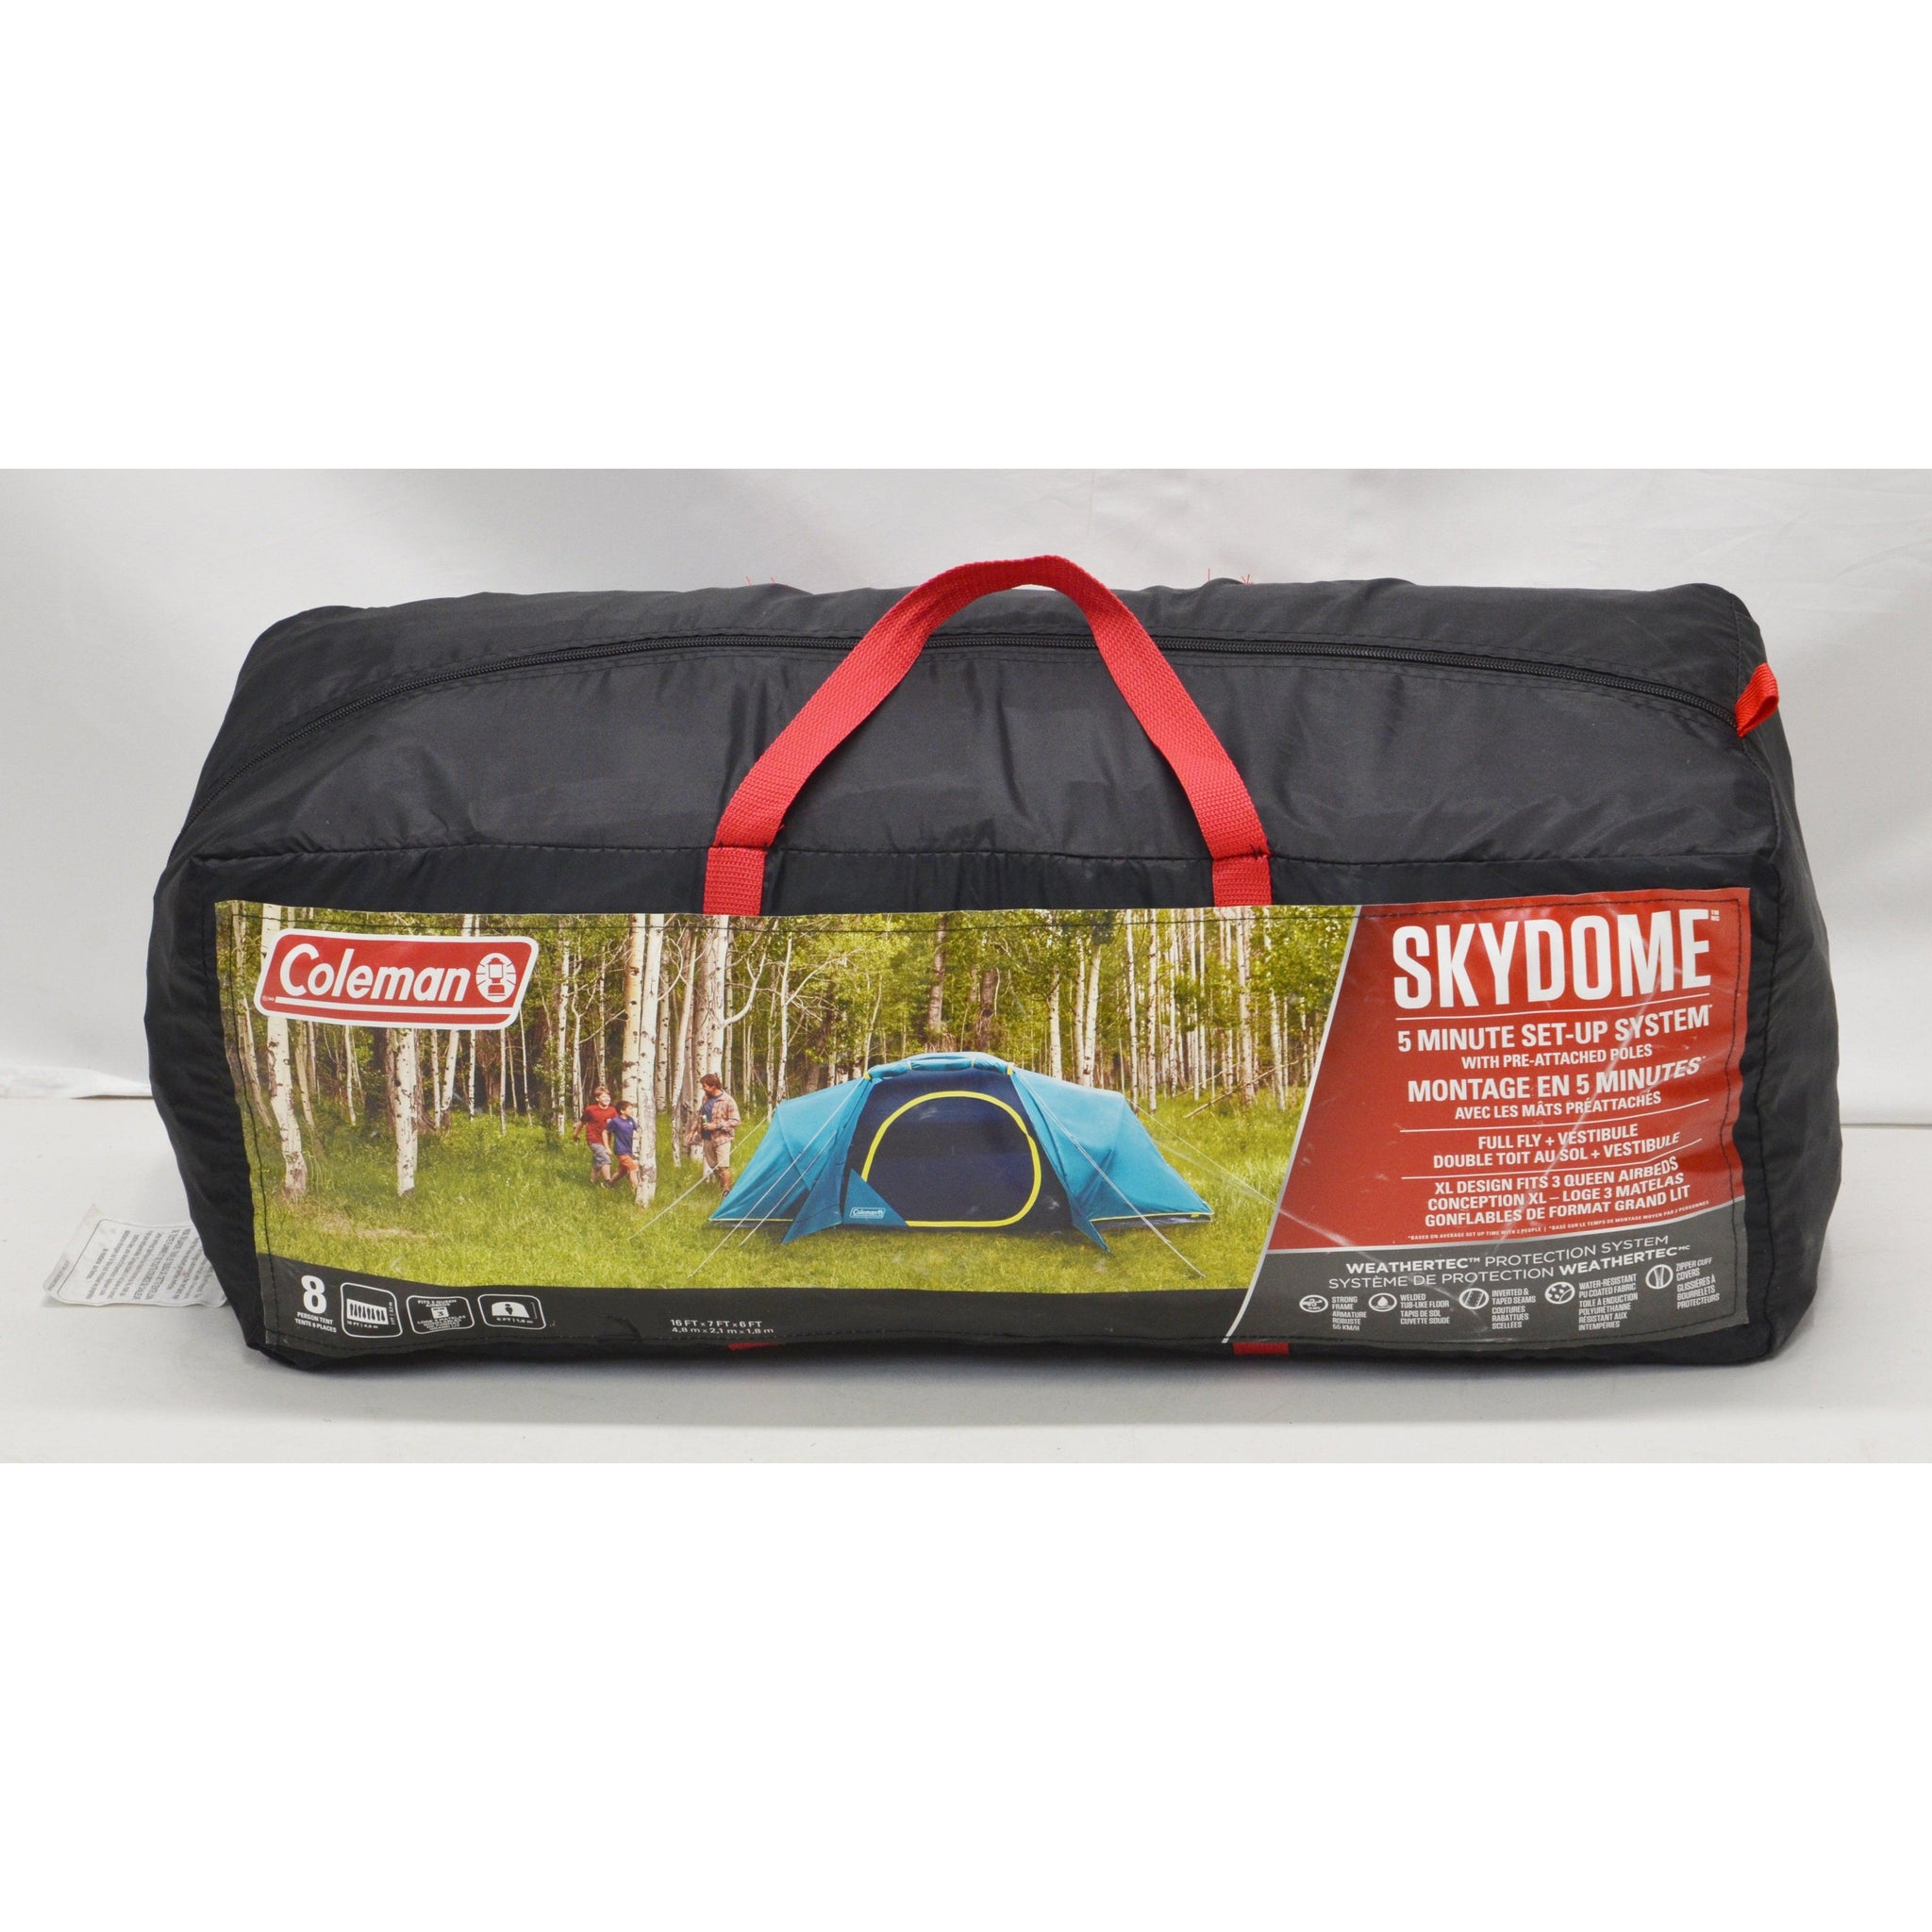 SKYDOME™ 8-Person Camping Tent XL